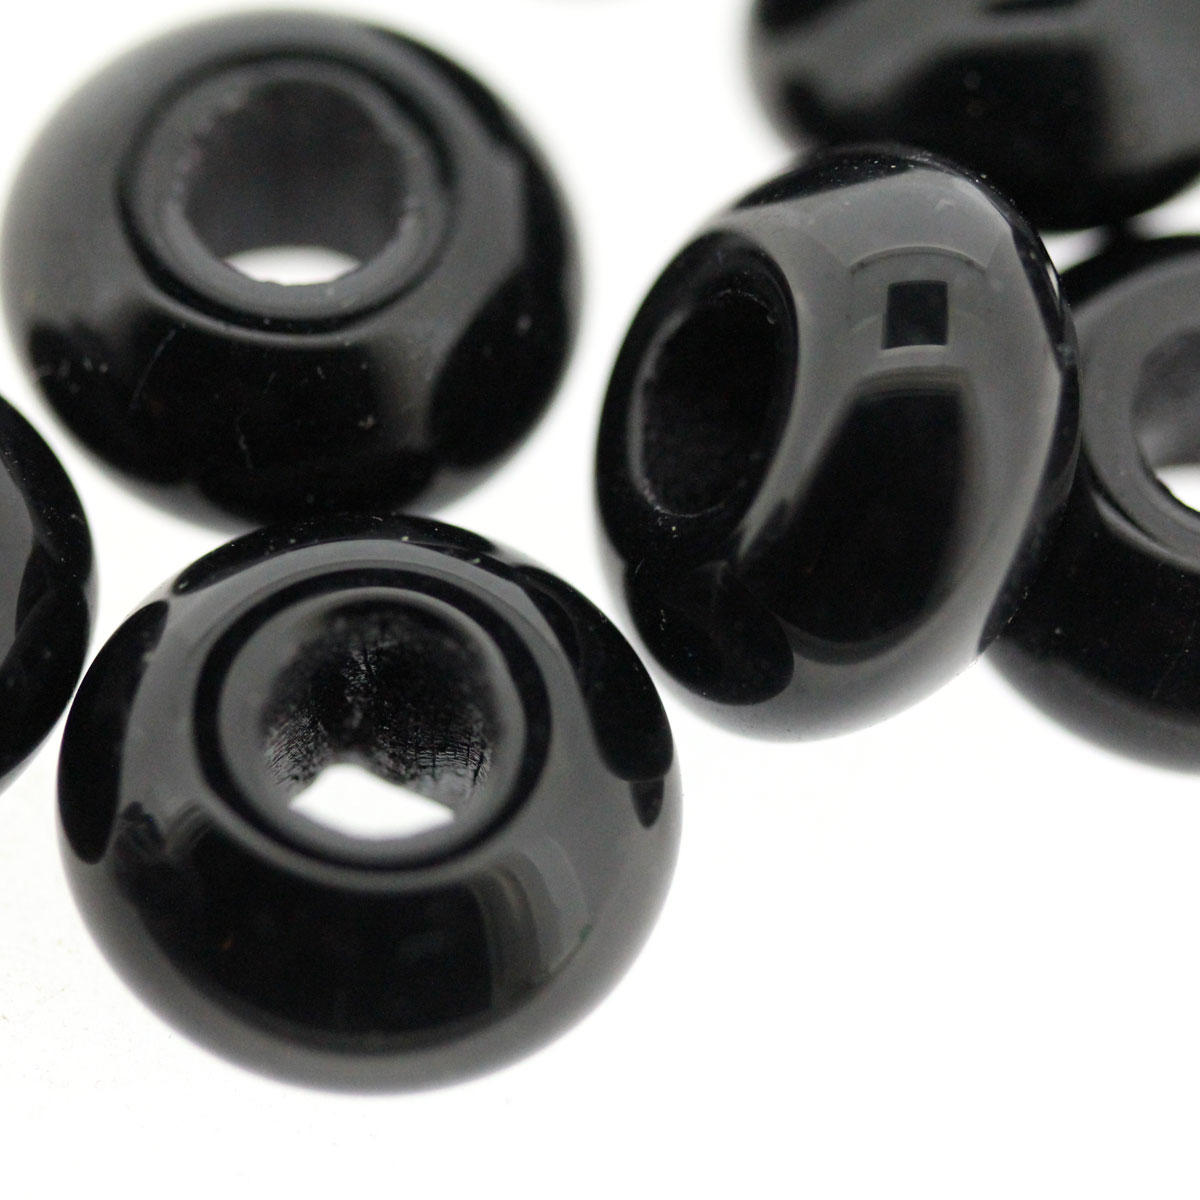 Black Large Holed Donut style Bead  Czech Glass Pressed Bead  11 x 17mm     Jewellery Designers Wholesale Pack  contains 25 Beads and is priced at  £8.70